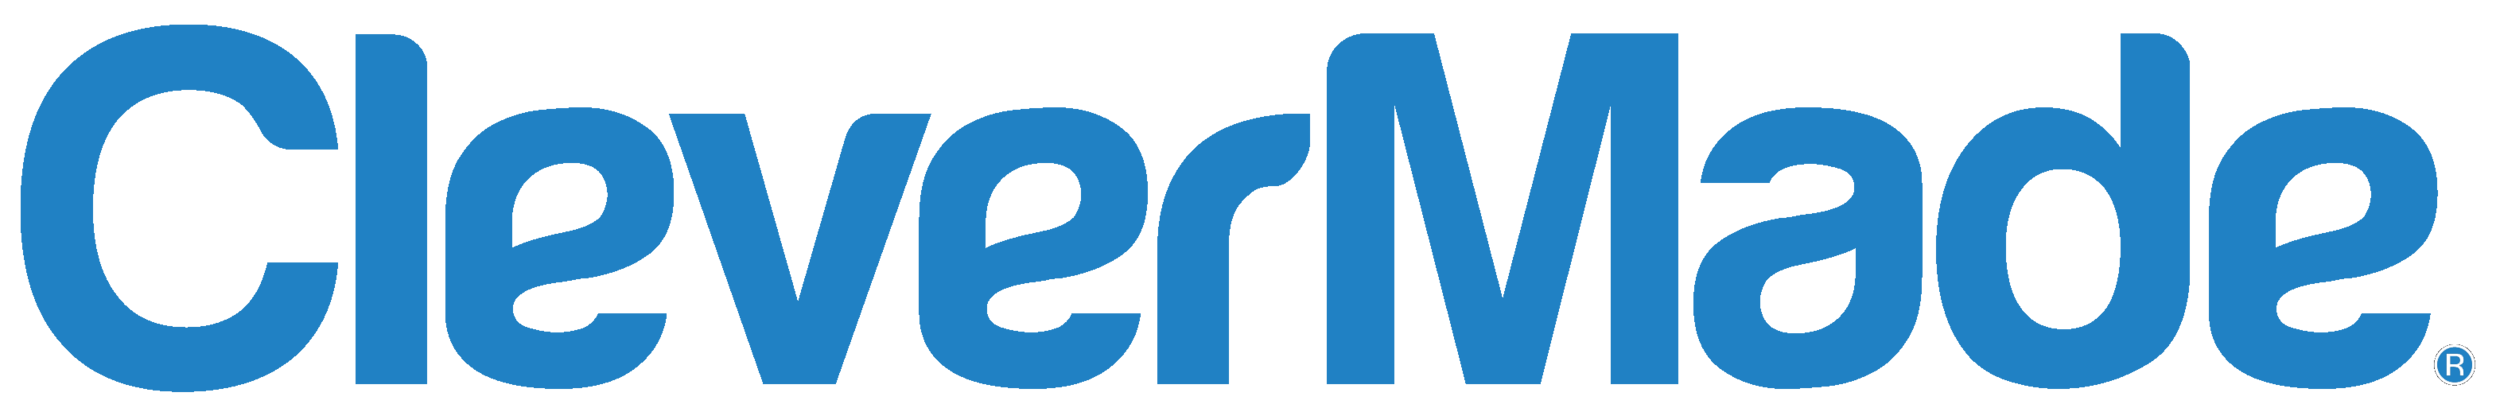 CleverMade-logo-blue (1).png